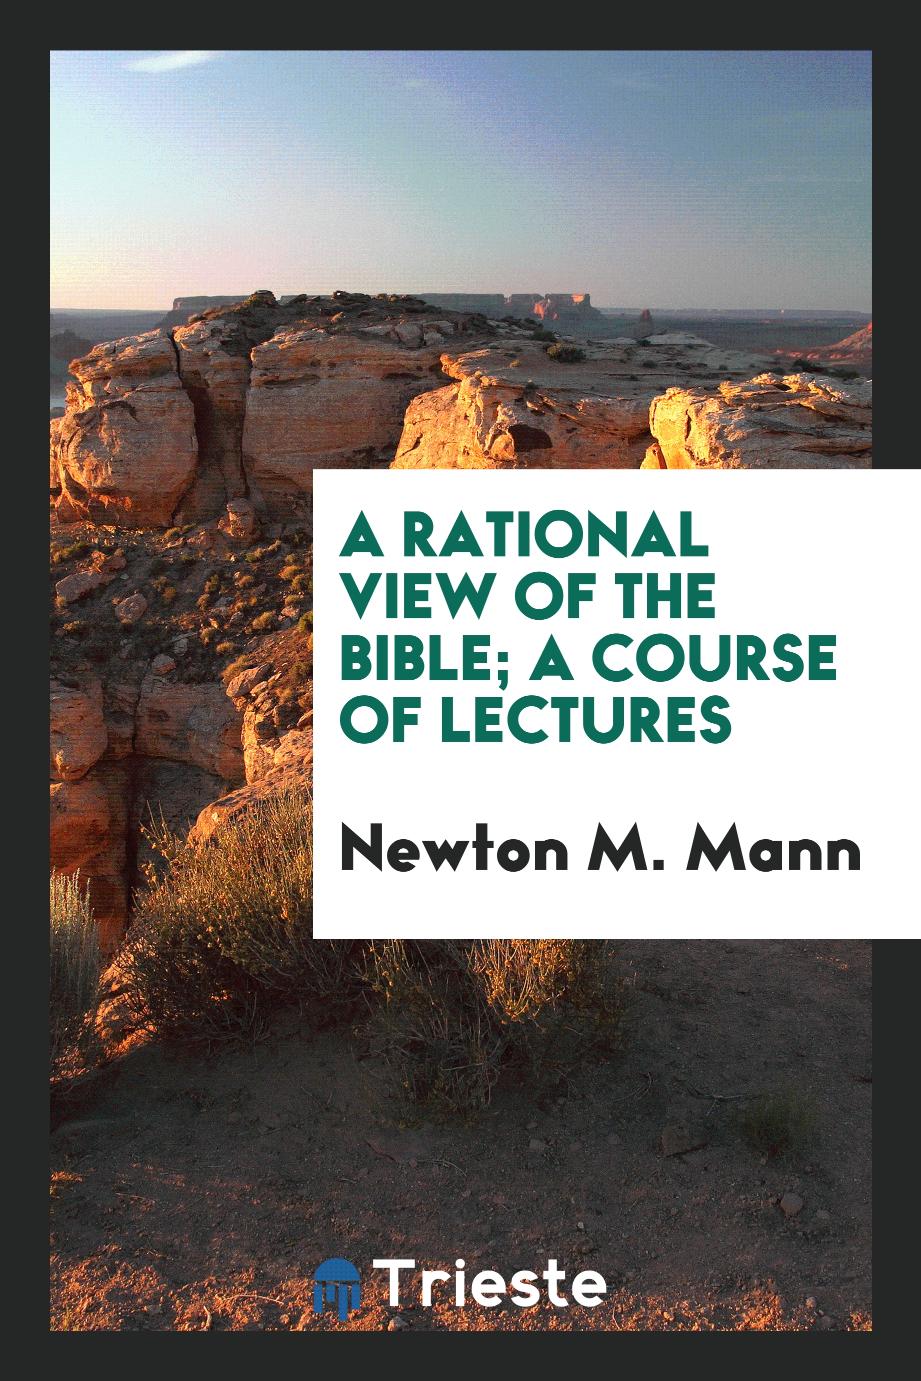 A rational view of the Bible; a course of lectures